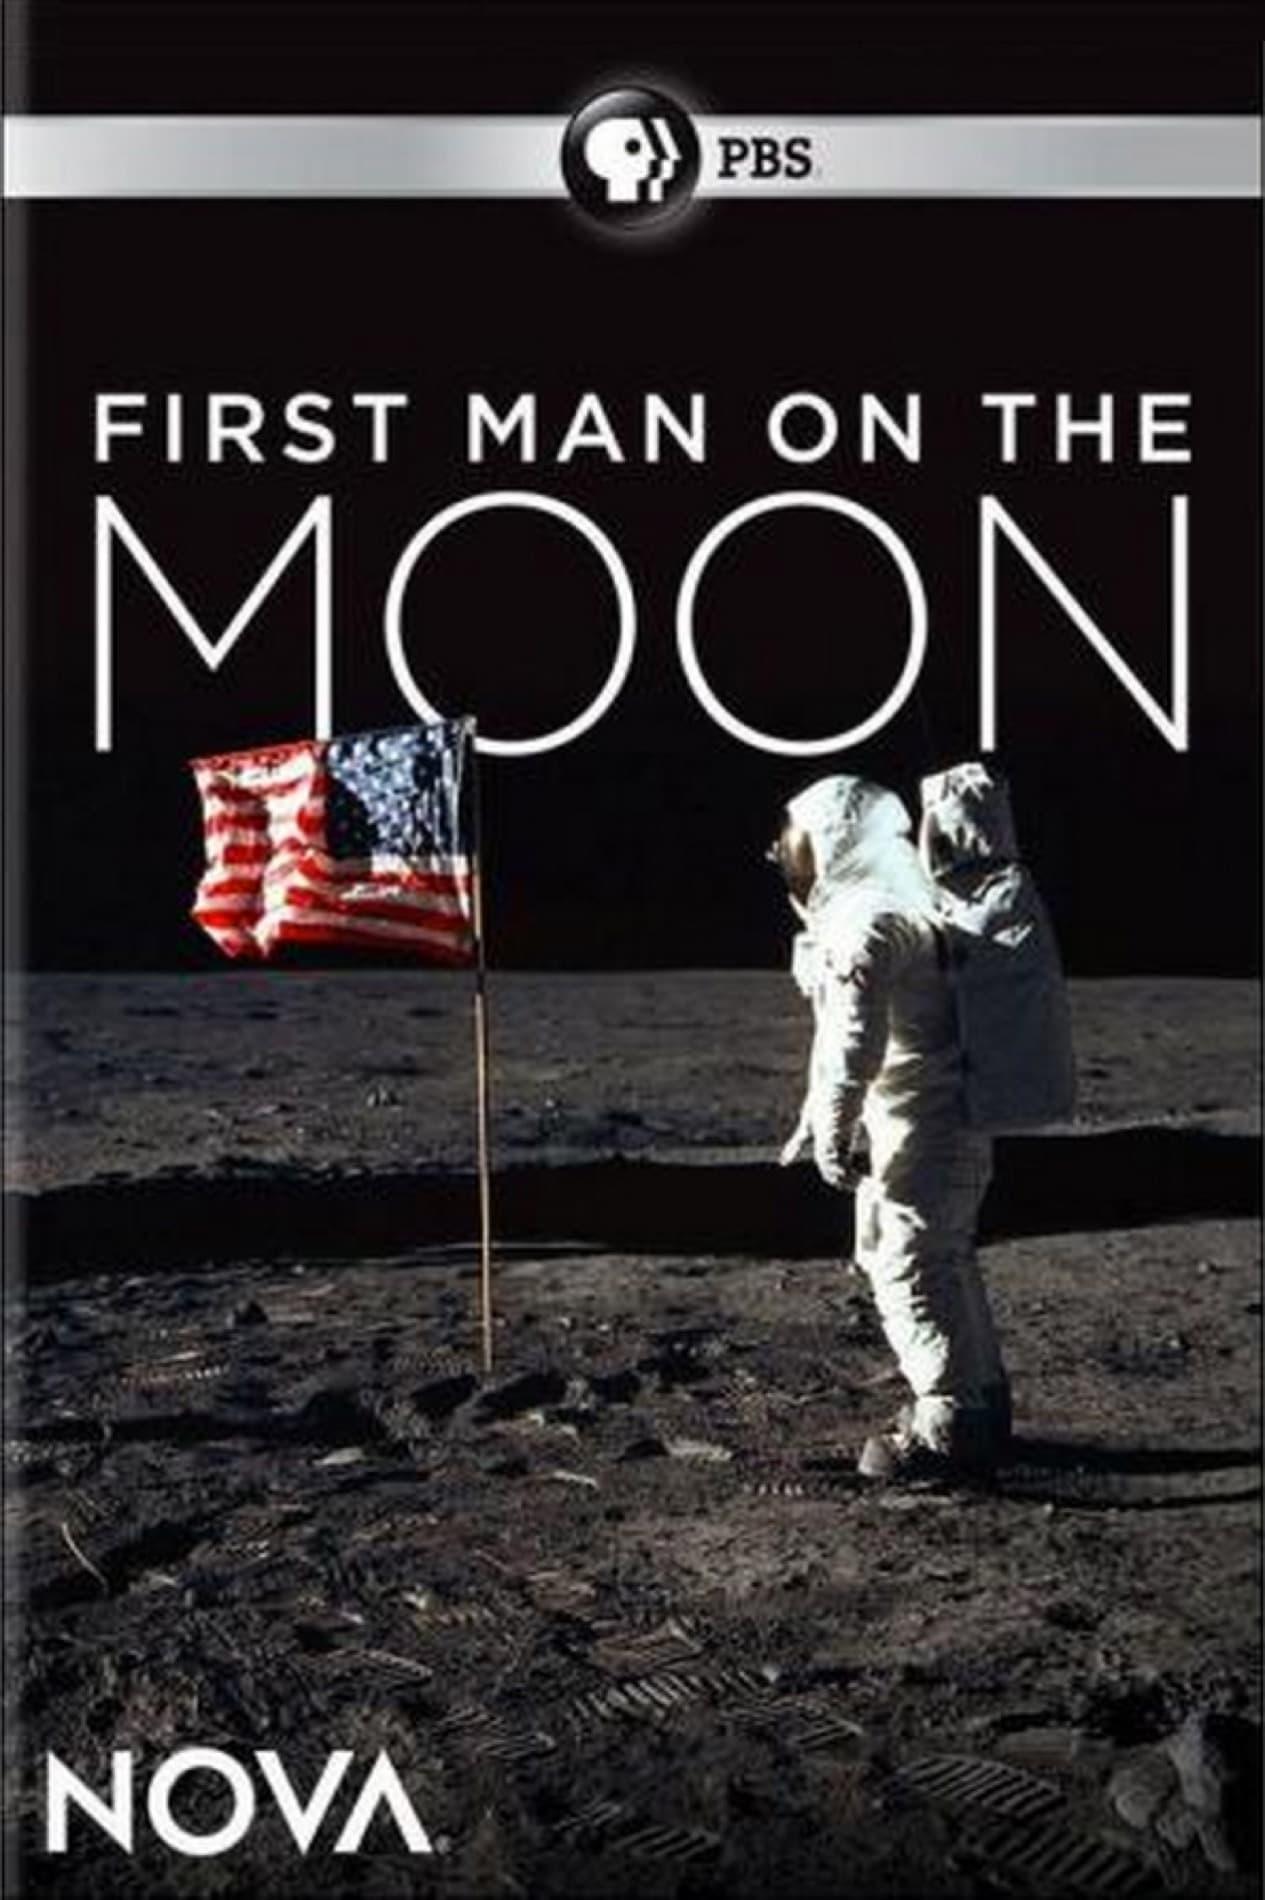 First Man on the Moon poster